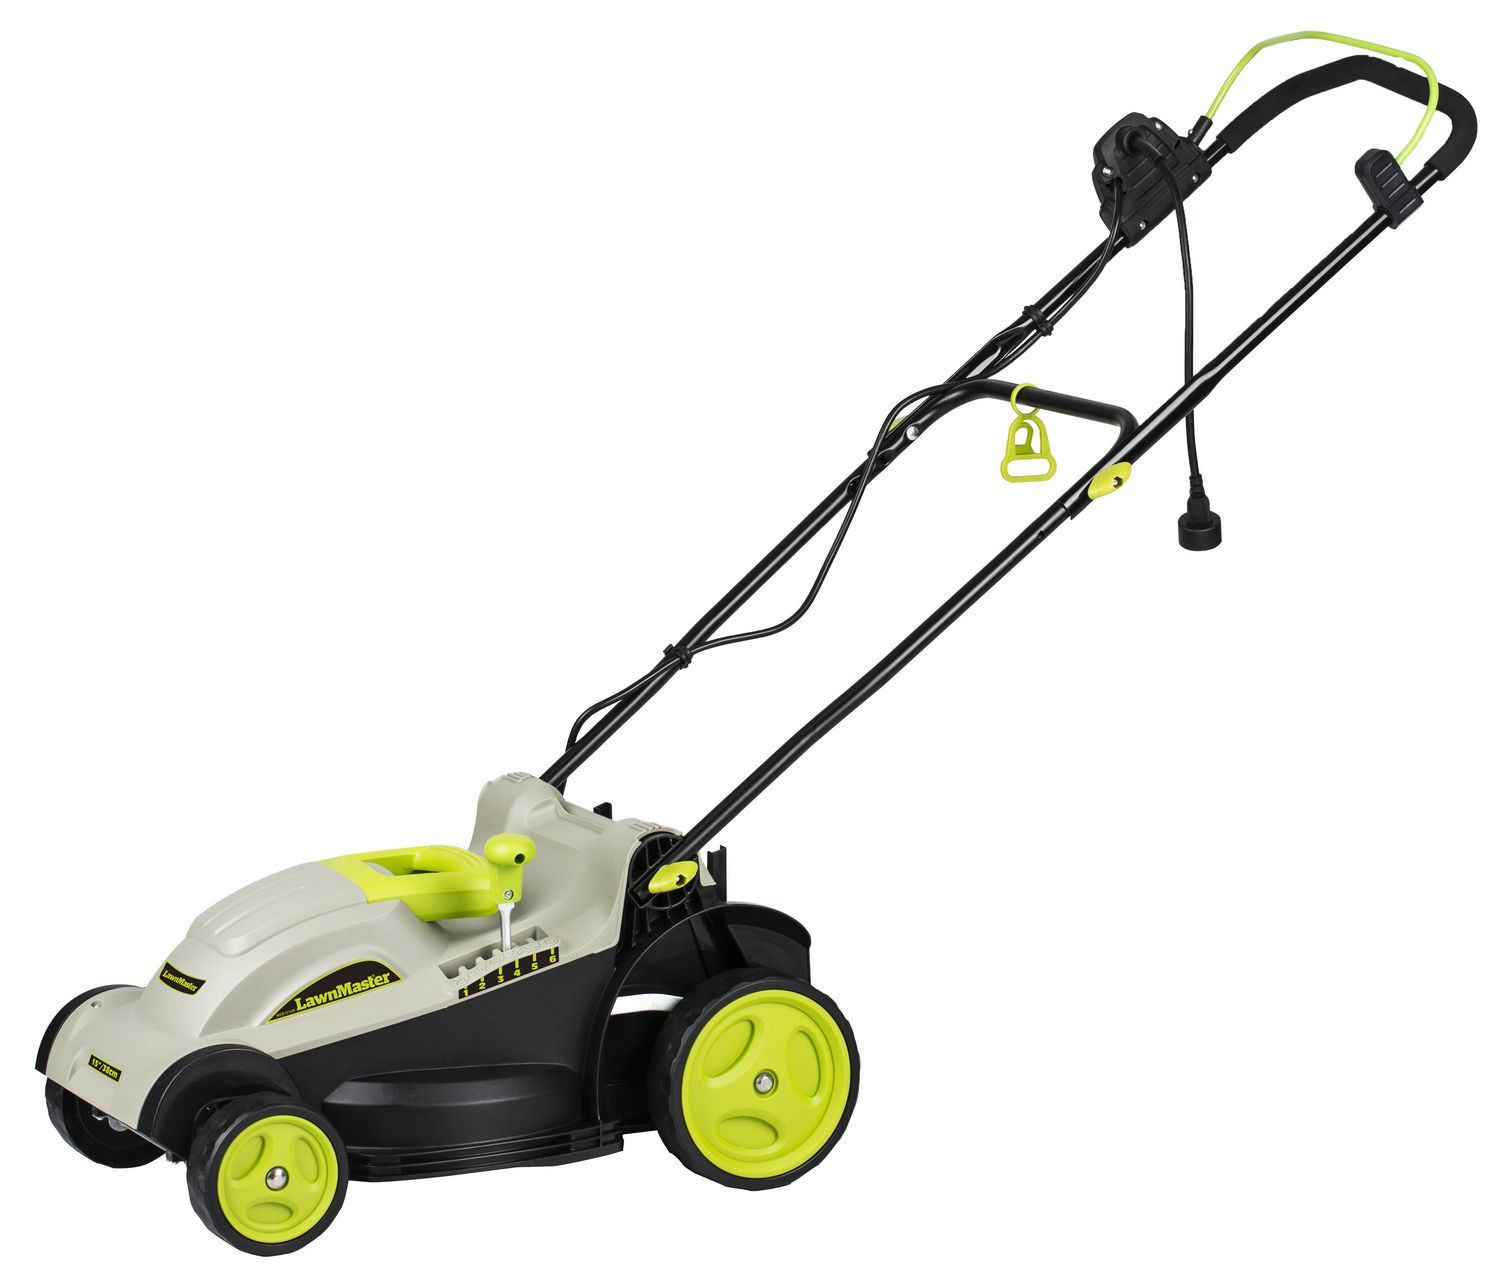 Lawnmaster Meb1014m 15 Inch 2 In 1 Electric Lawn Mower Collection Box